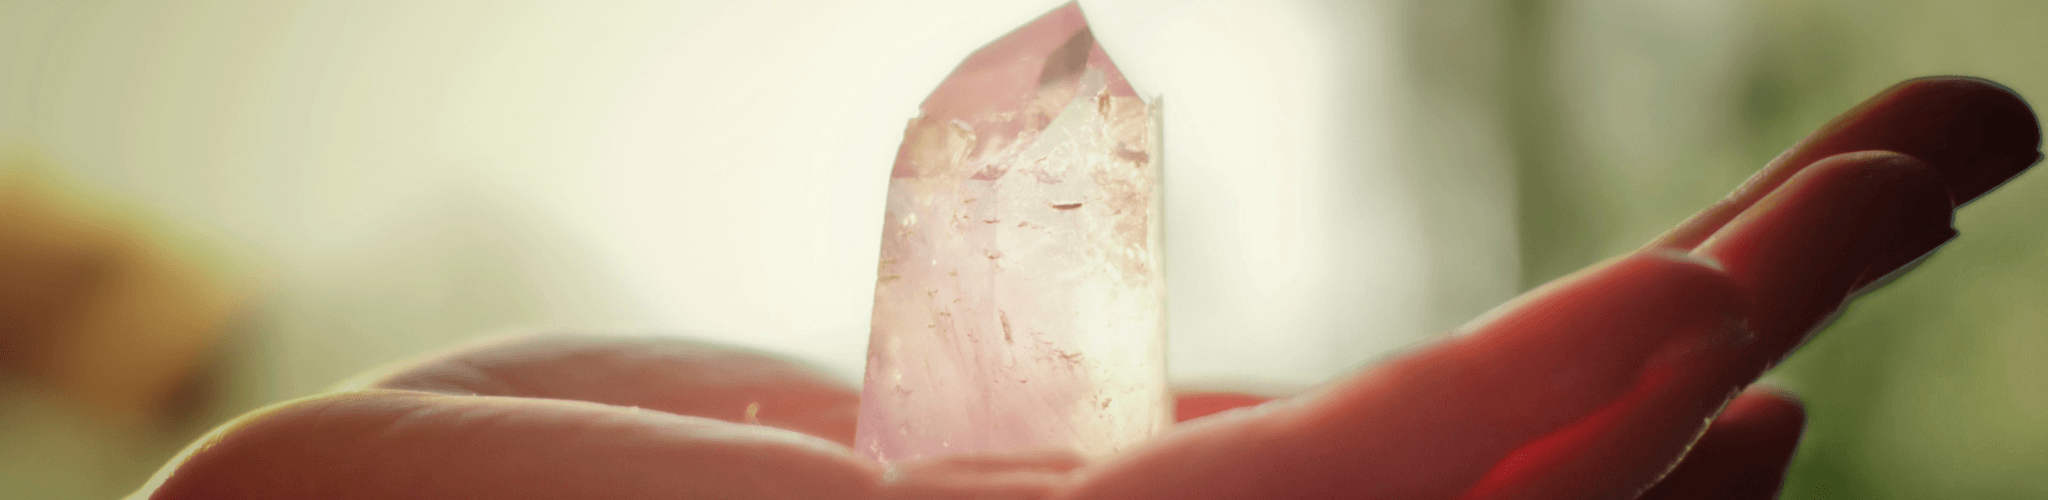 Introduction to crystal healing 2048 x 500px